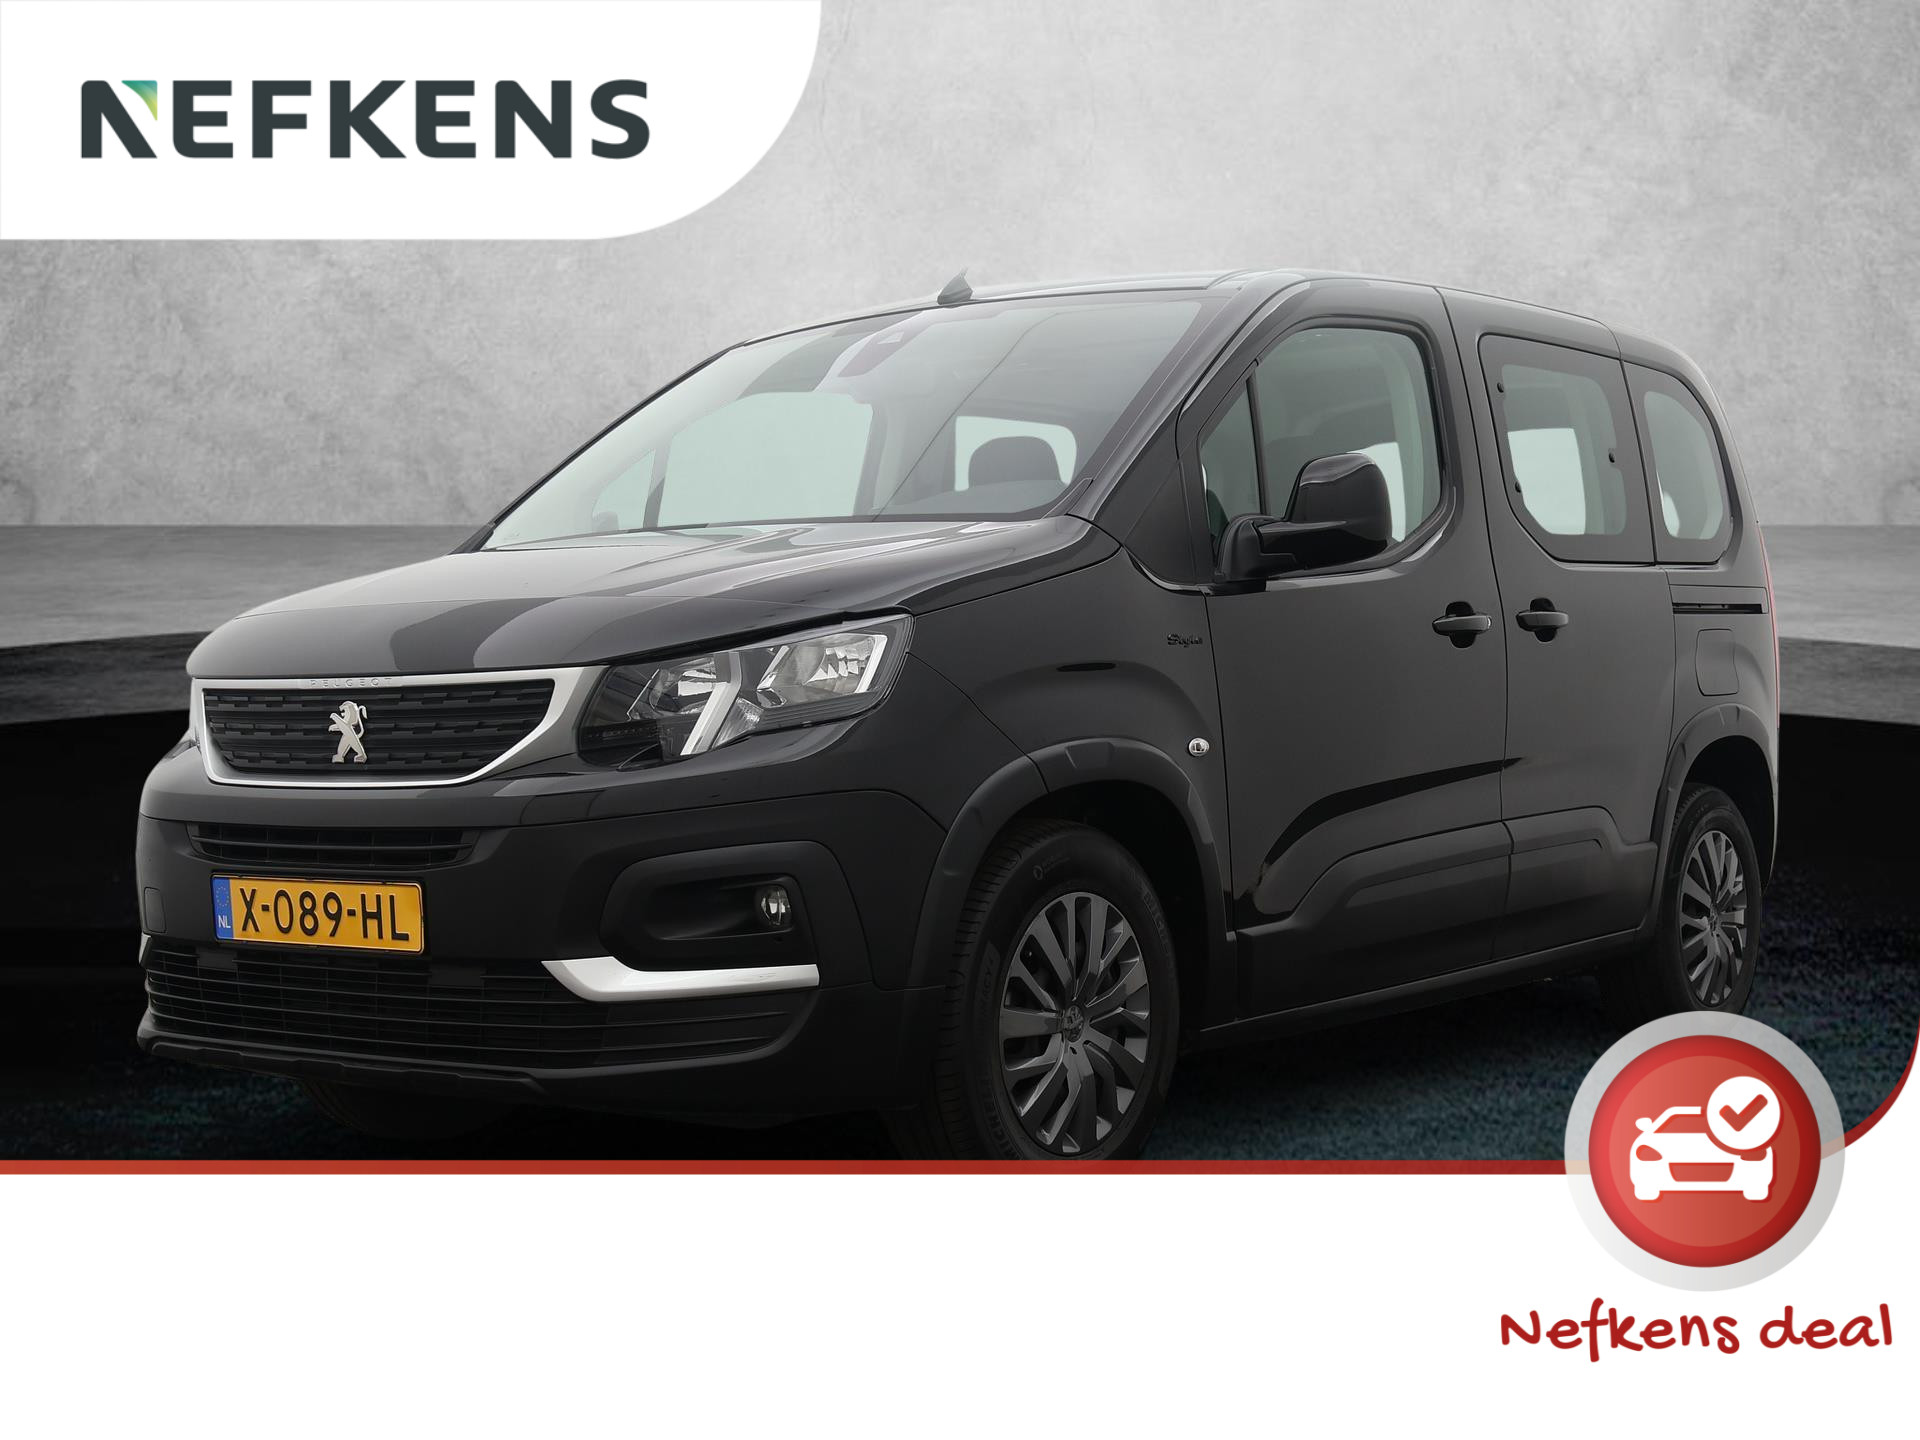 Peugeot Rifter Style 110pk | Navigatie | Camera | Airco | Cruise Control | Apple Carplay/Android Auto bij viaBOVAG.nl